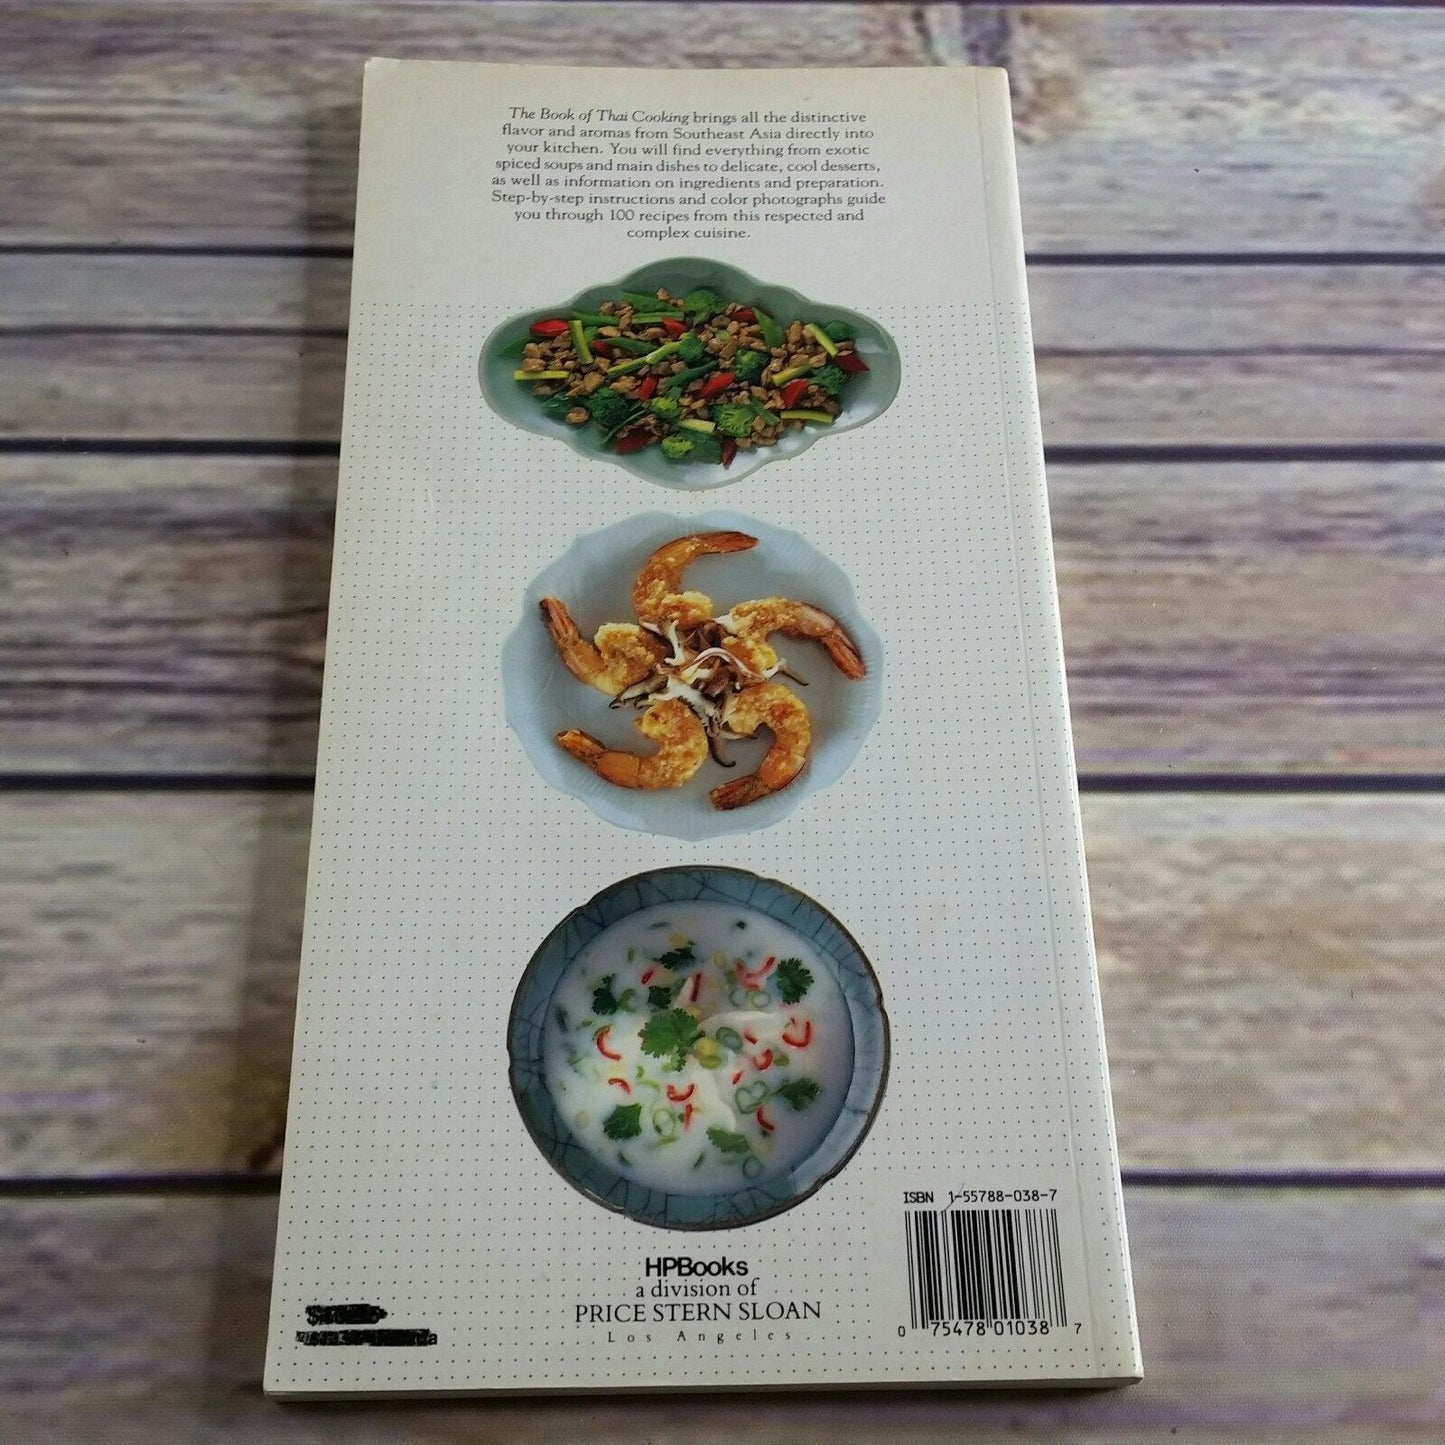 Vintage Cookbook The Book of Thai Cooking Recipes 1992 HP Books Hilaire Walden Paperback